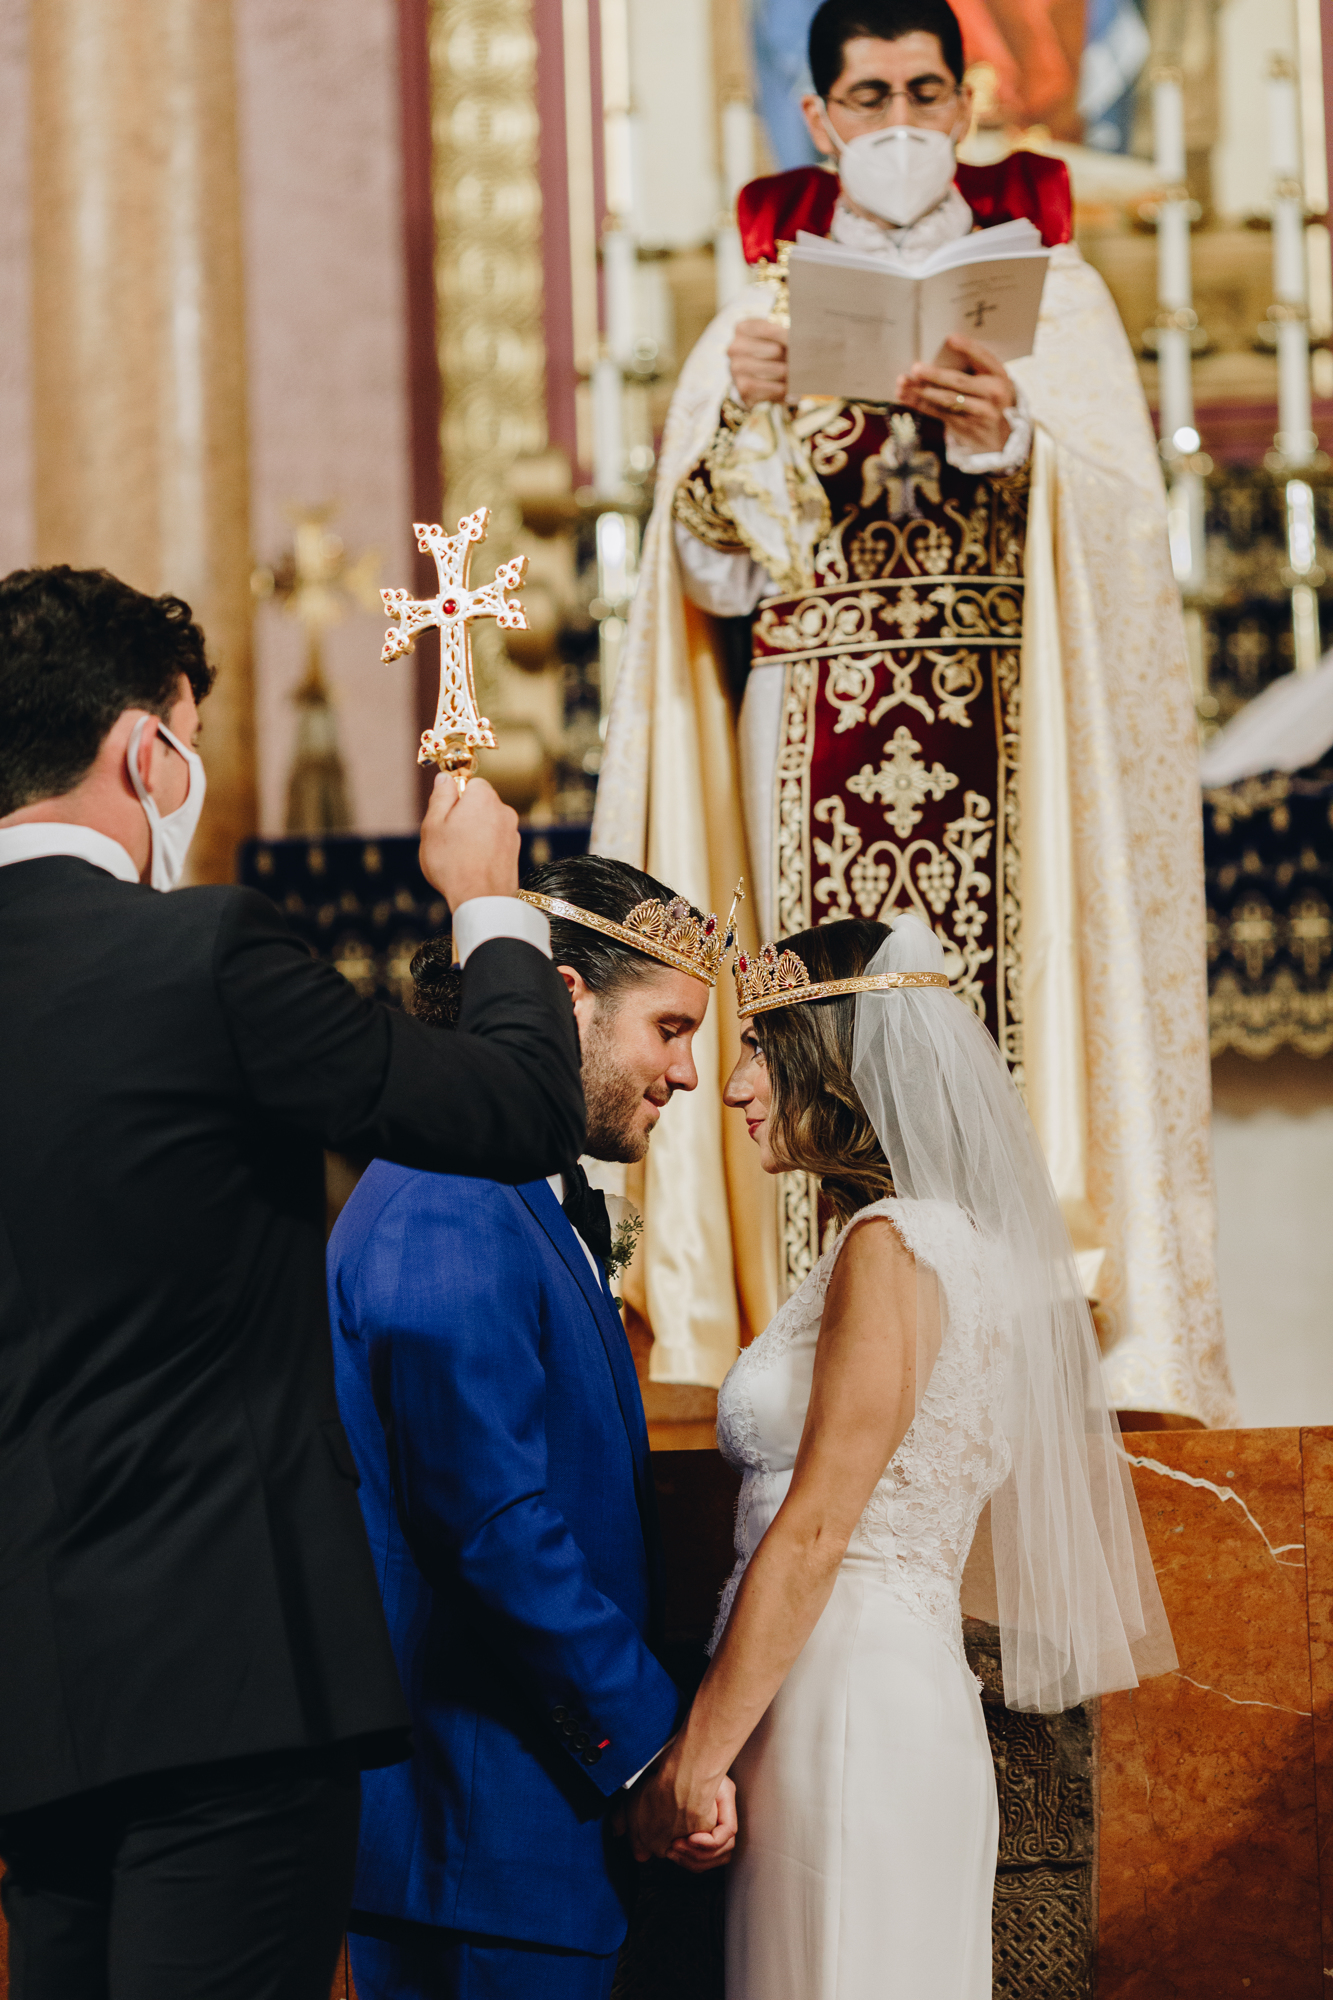 Crowning wedding ceremony at Armenian Church in NYC